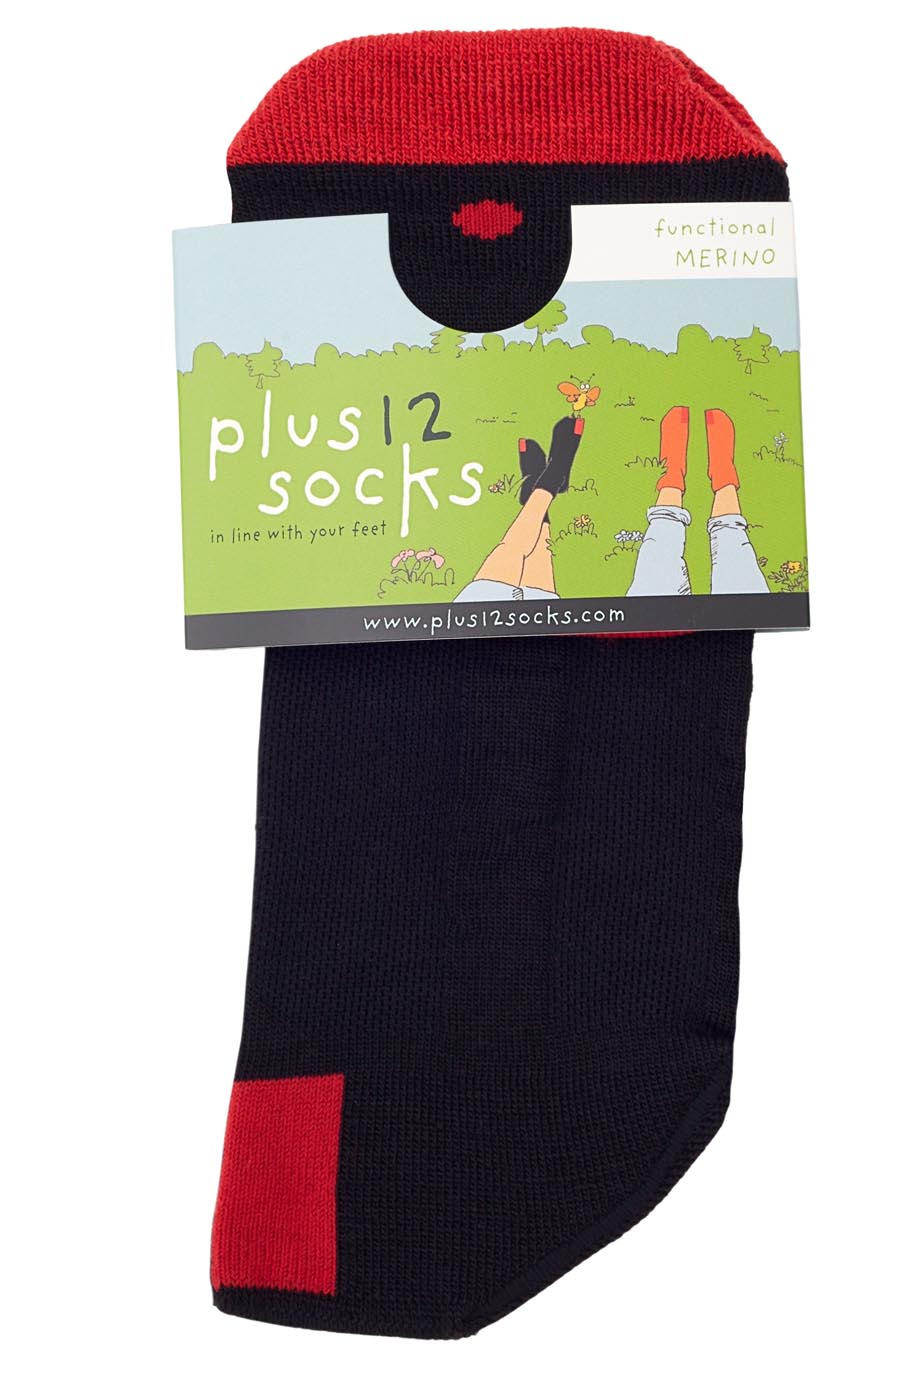 BABY'S plus12socks: SPECIAL EDITION PRO-SKID SOCKS FOR BABIES